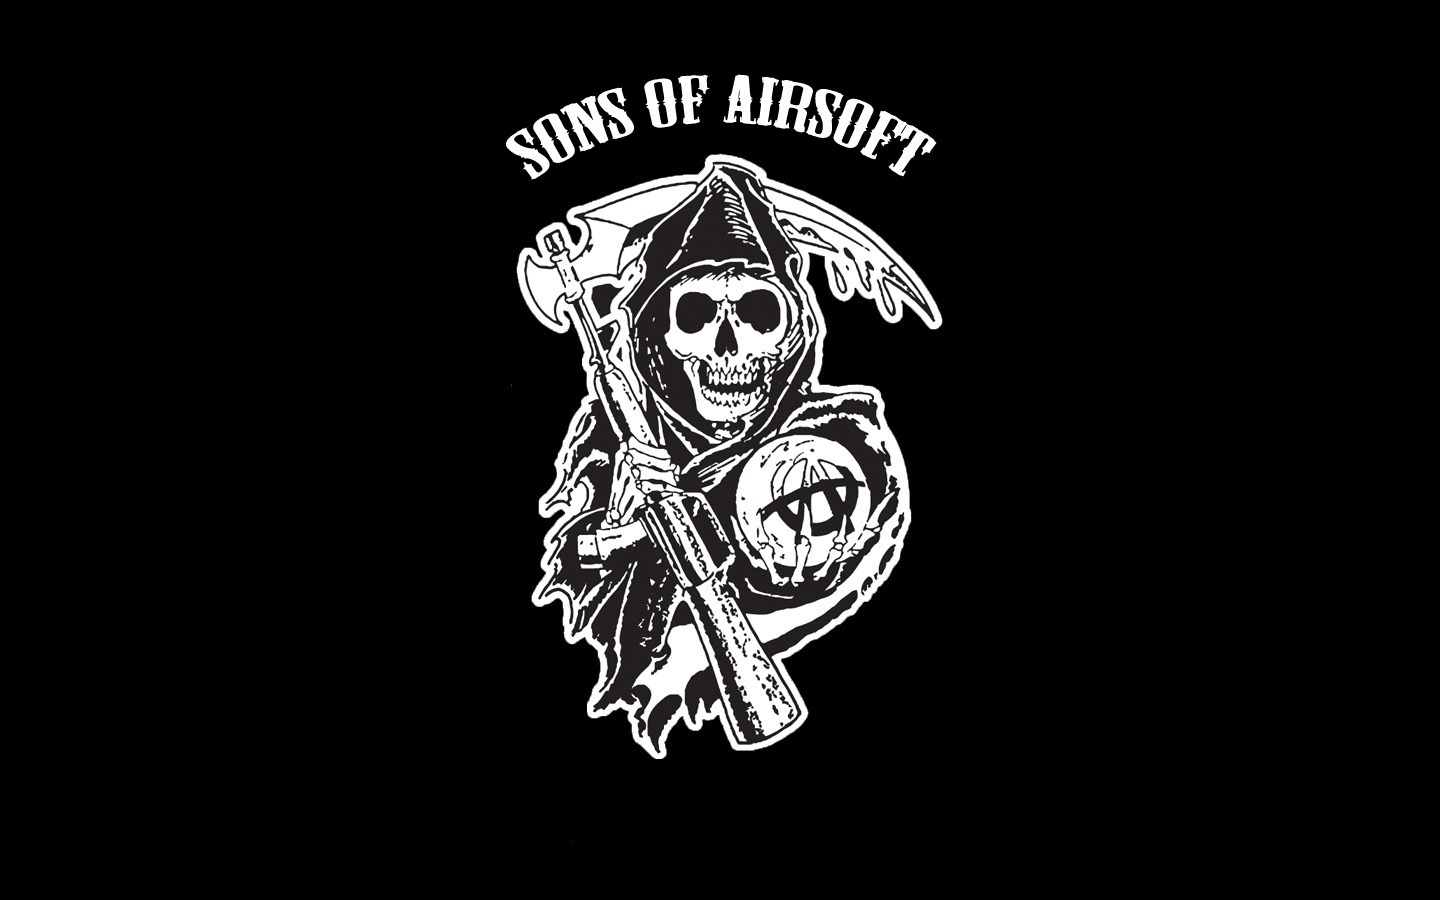 SONS OF AIRSOFT